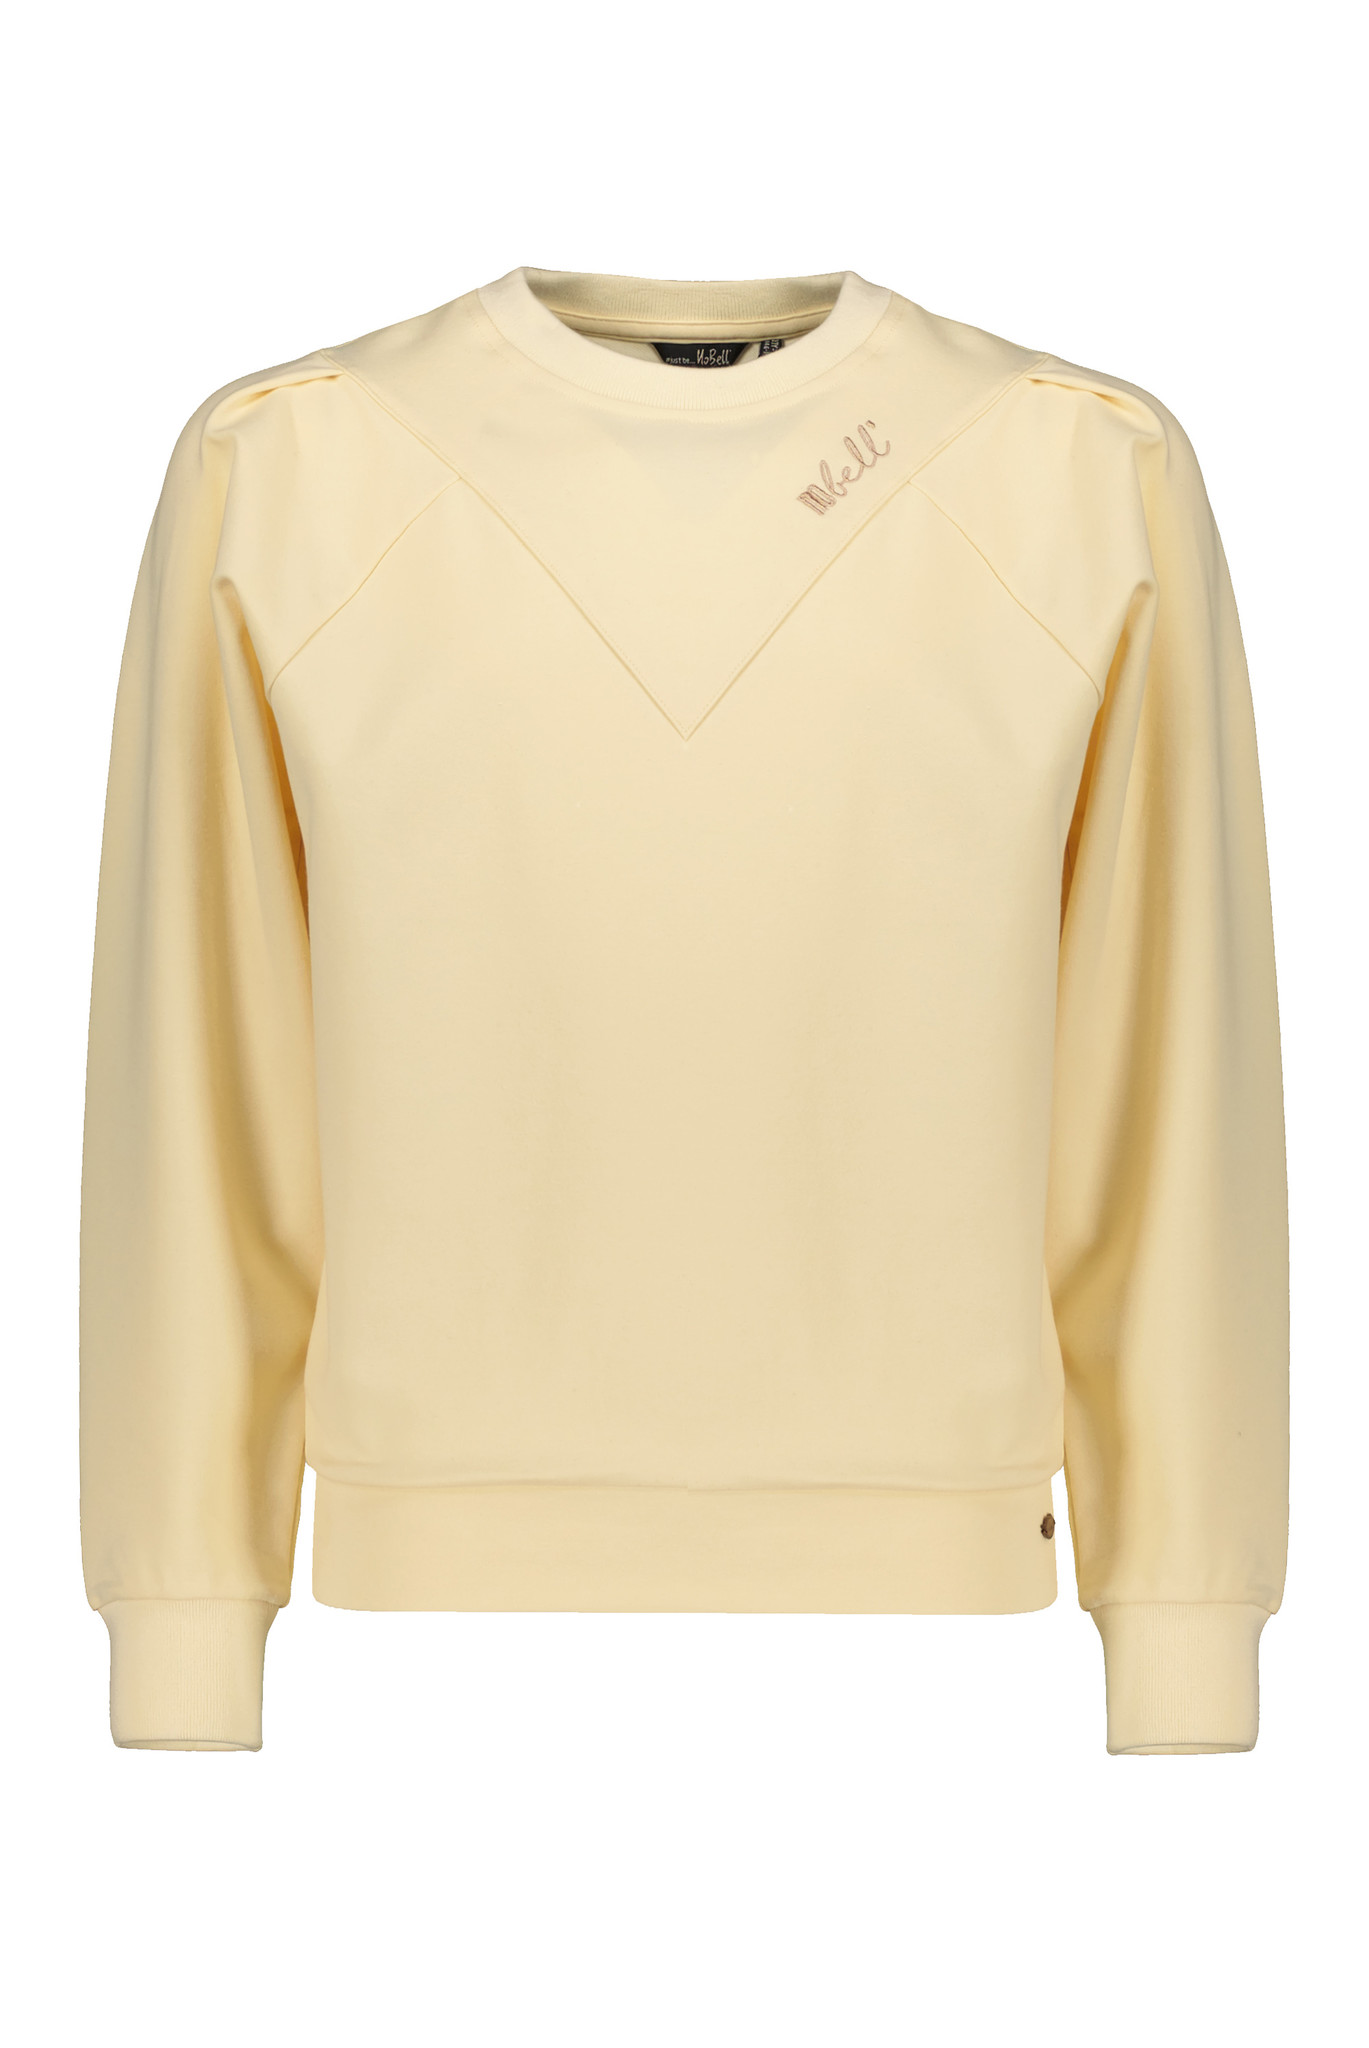 NoBell Meisjes sweater - Kimo - Pearled ivory